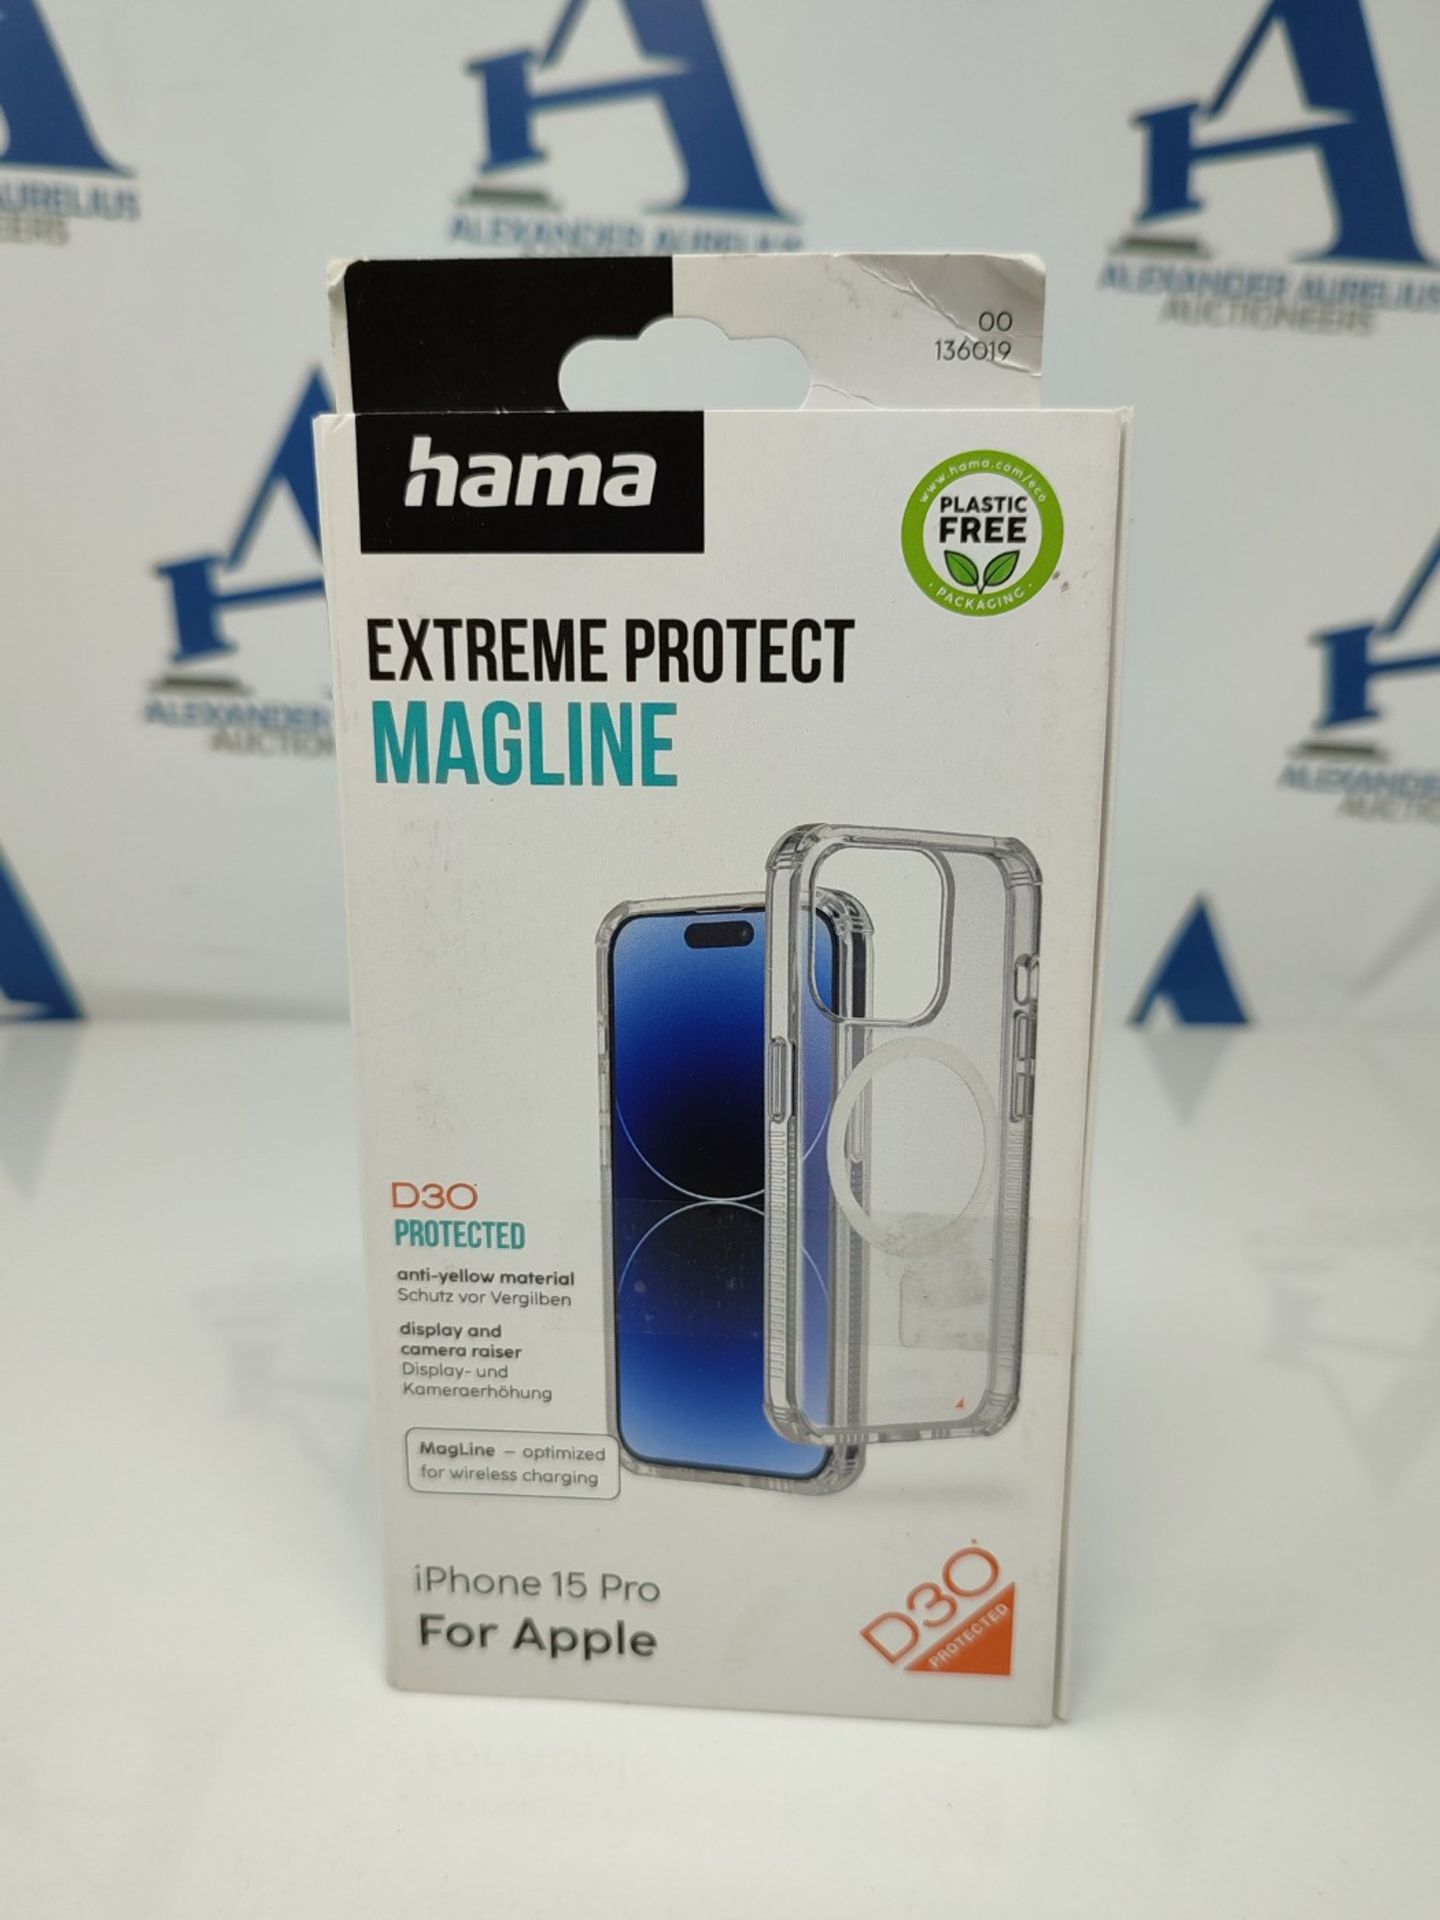 Hama Phone Case "Extreme Protect" for iPhone 15 Pro and MagSafe (D3O bumper, shockproo - Image 2 of 3